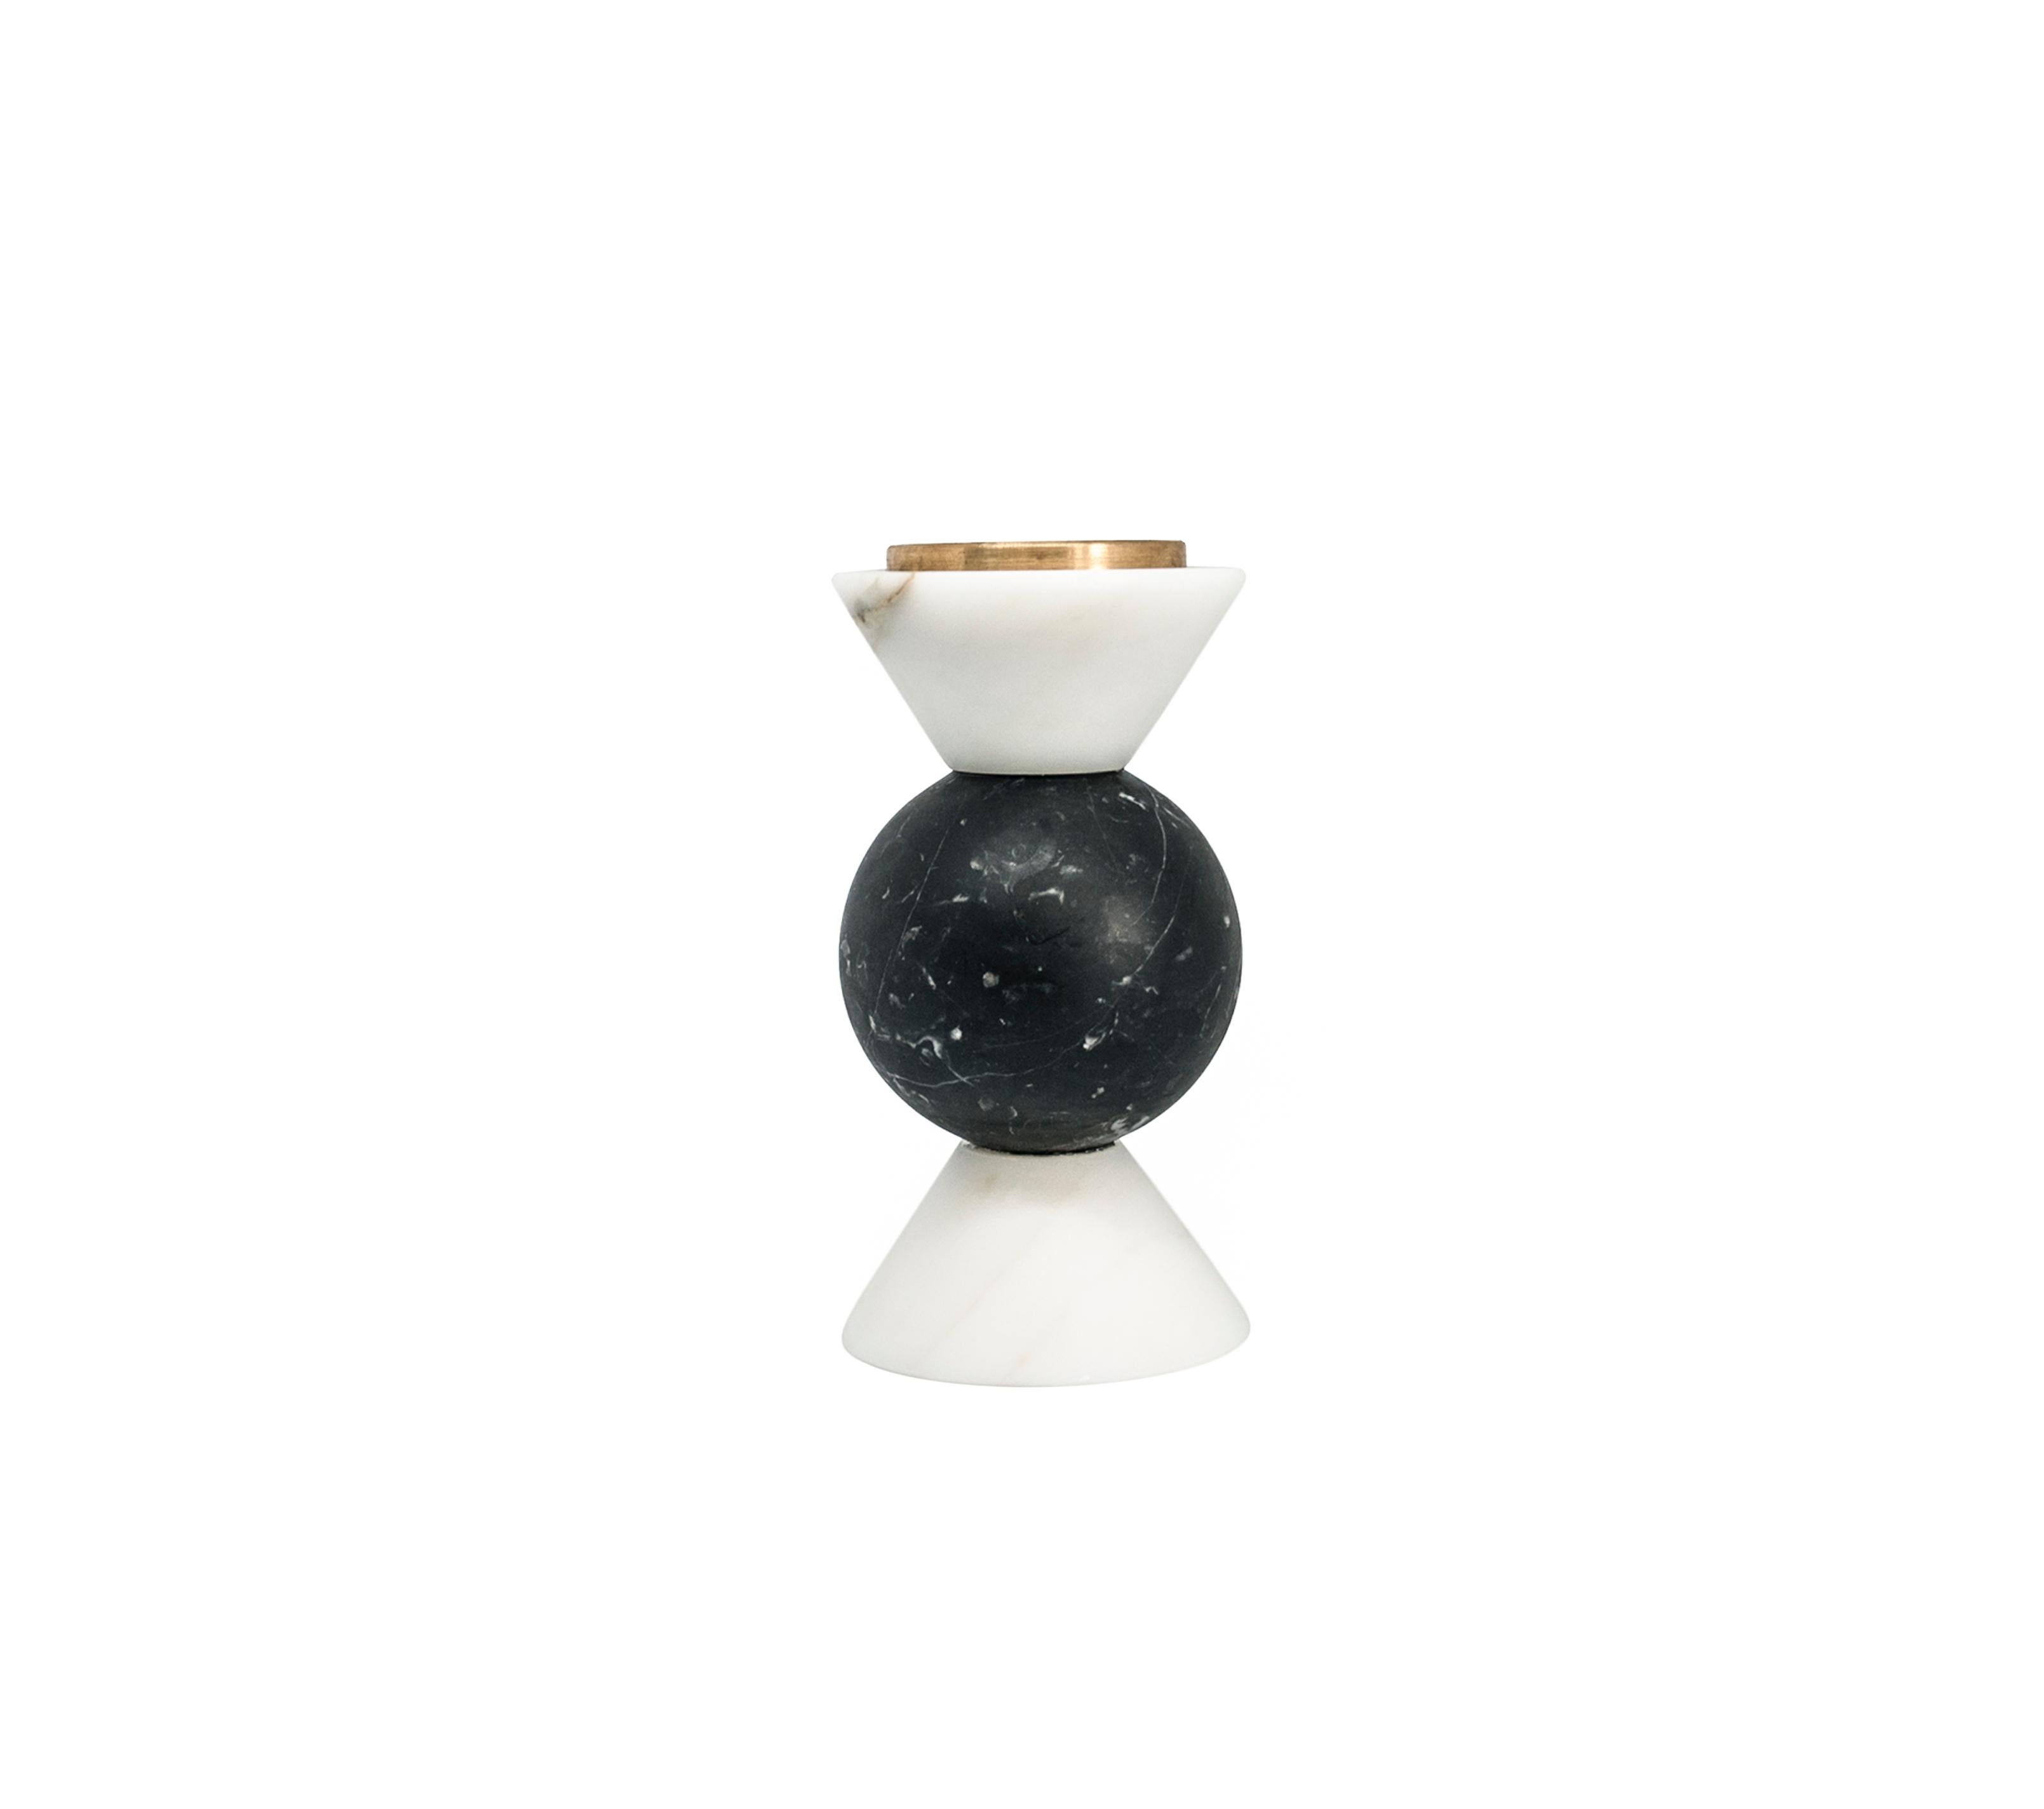 Short rounded two-tone candleholder in white Carrara marble, black Marquina marble and brass.
-Jacopo Simonetti Design for FiammettaV-
Each piece is in a way unique (every marble block is different in veins and shades) and handmade by Italian